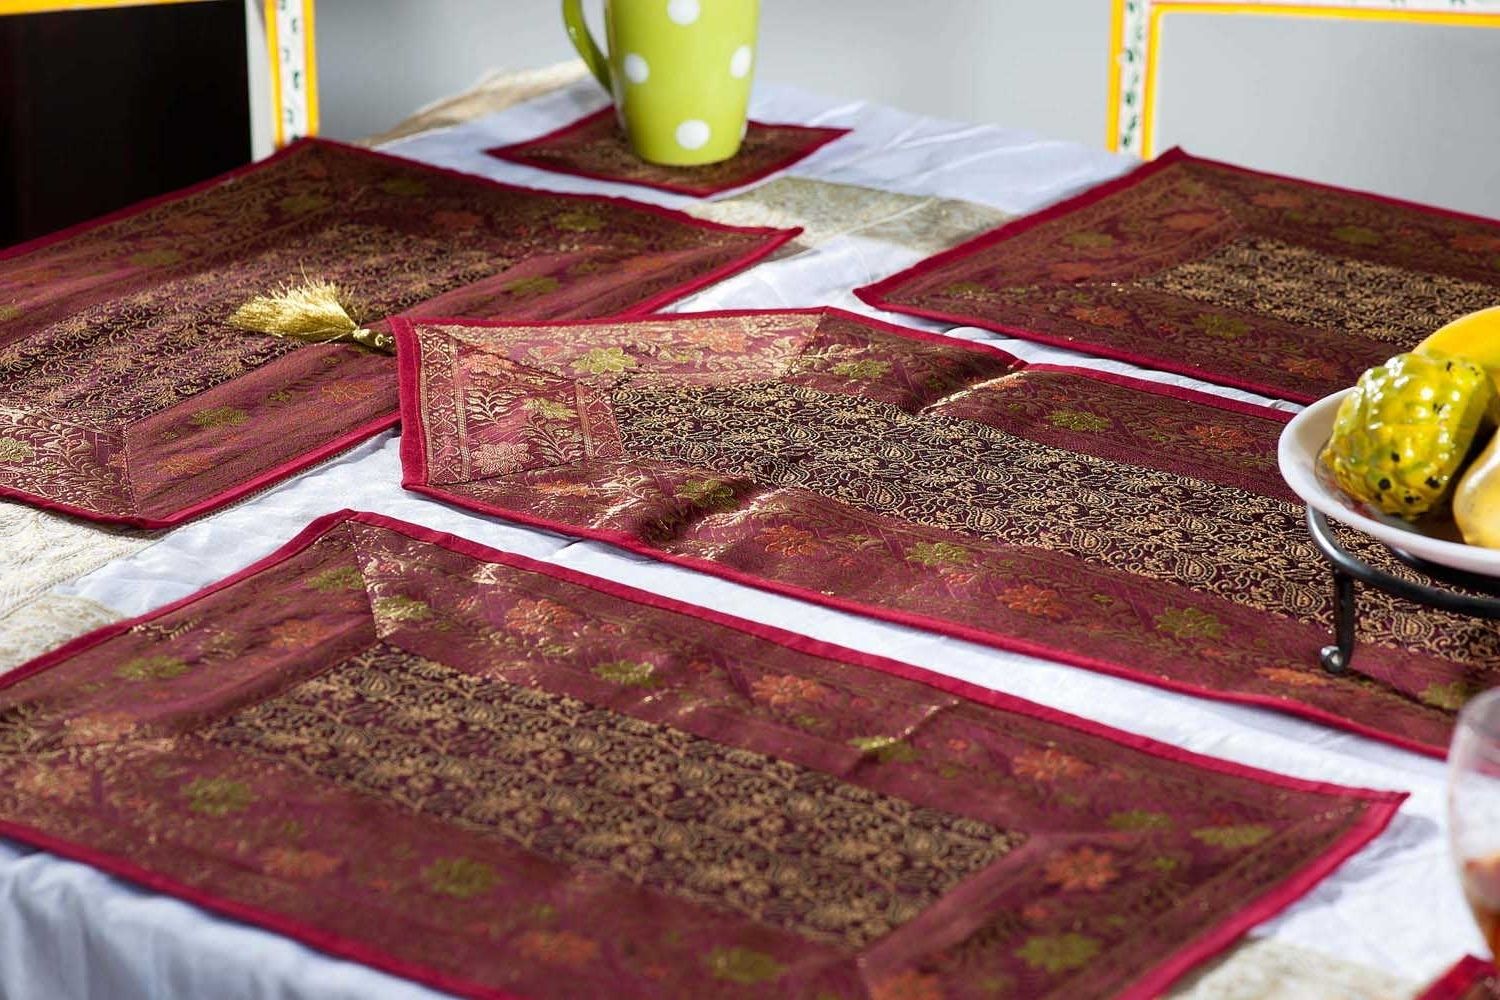 Most Recent Indian Style Dining Tables With Buy Online Decorative Zari Table Runner Handmade India Home Decor (View 22 of 25)